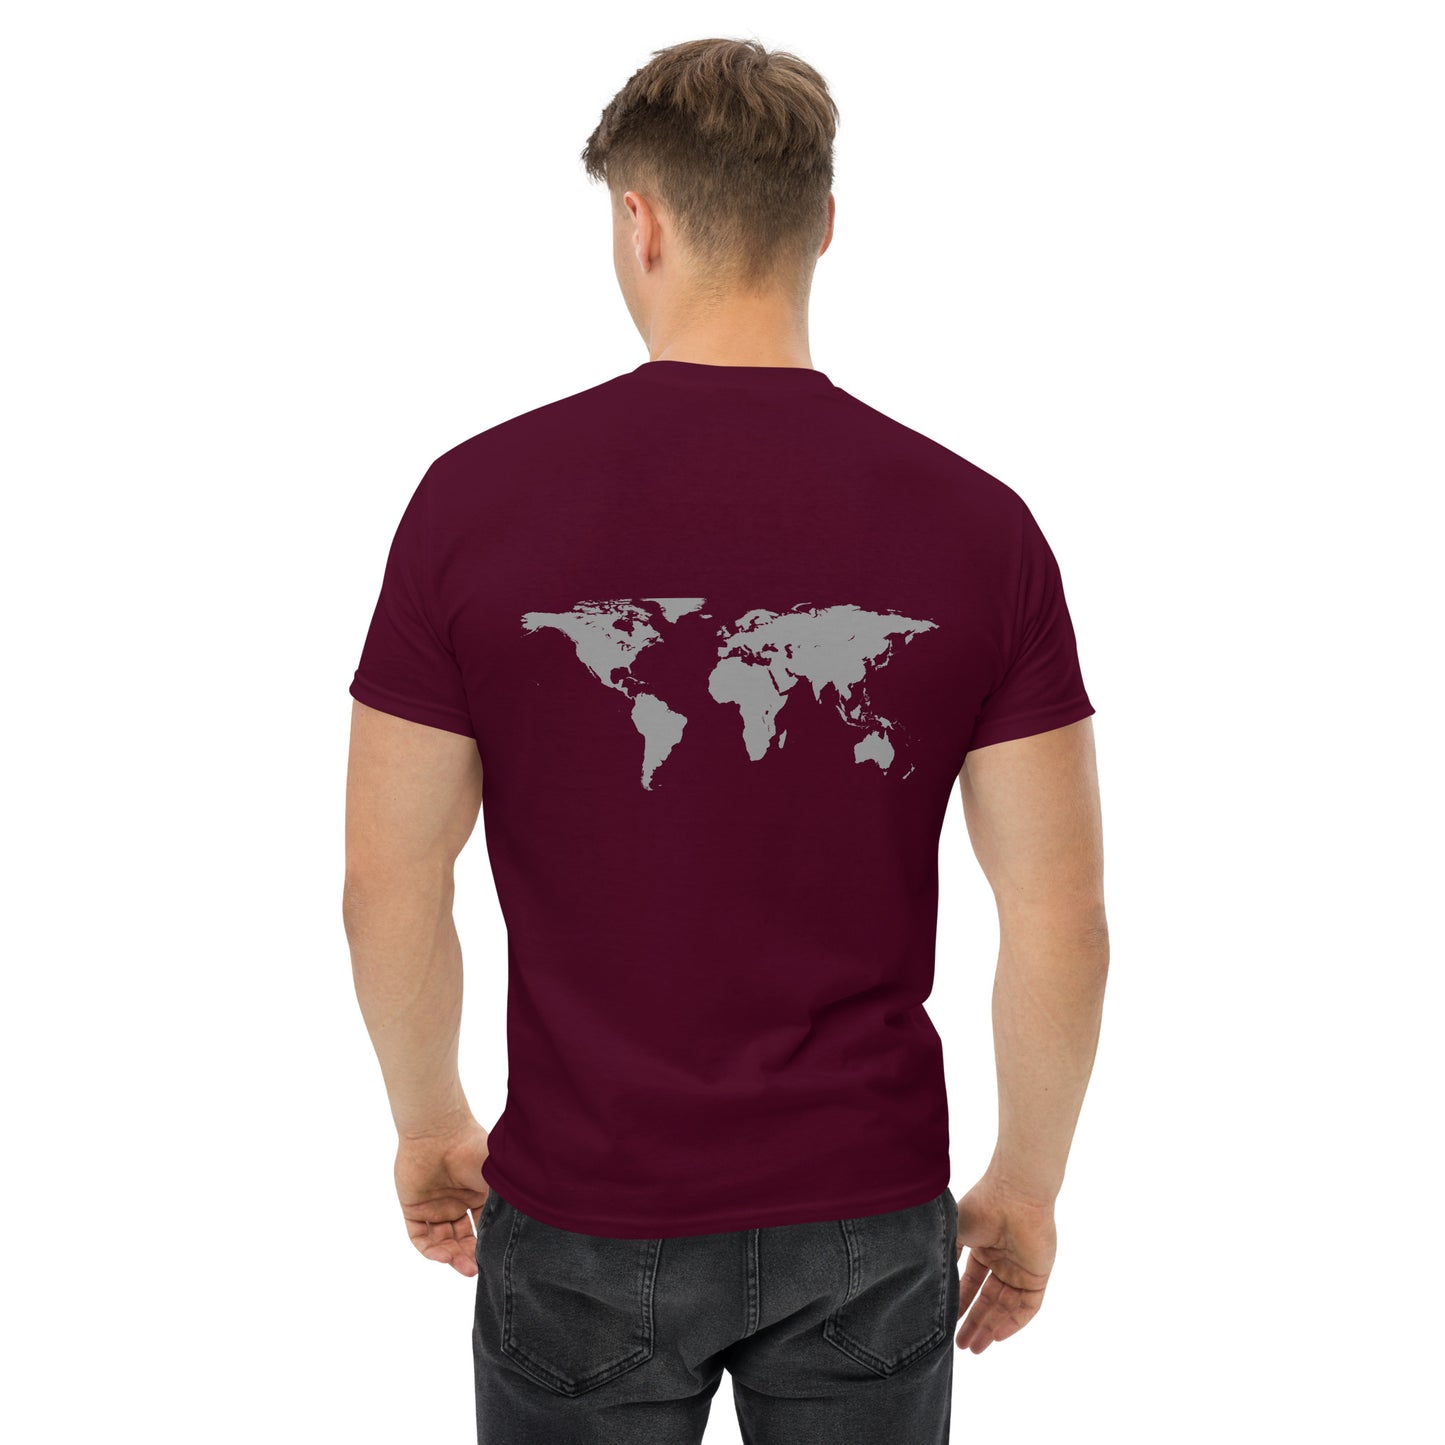 Jeppy and World Map Two-Sided T-Shirt